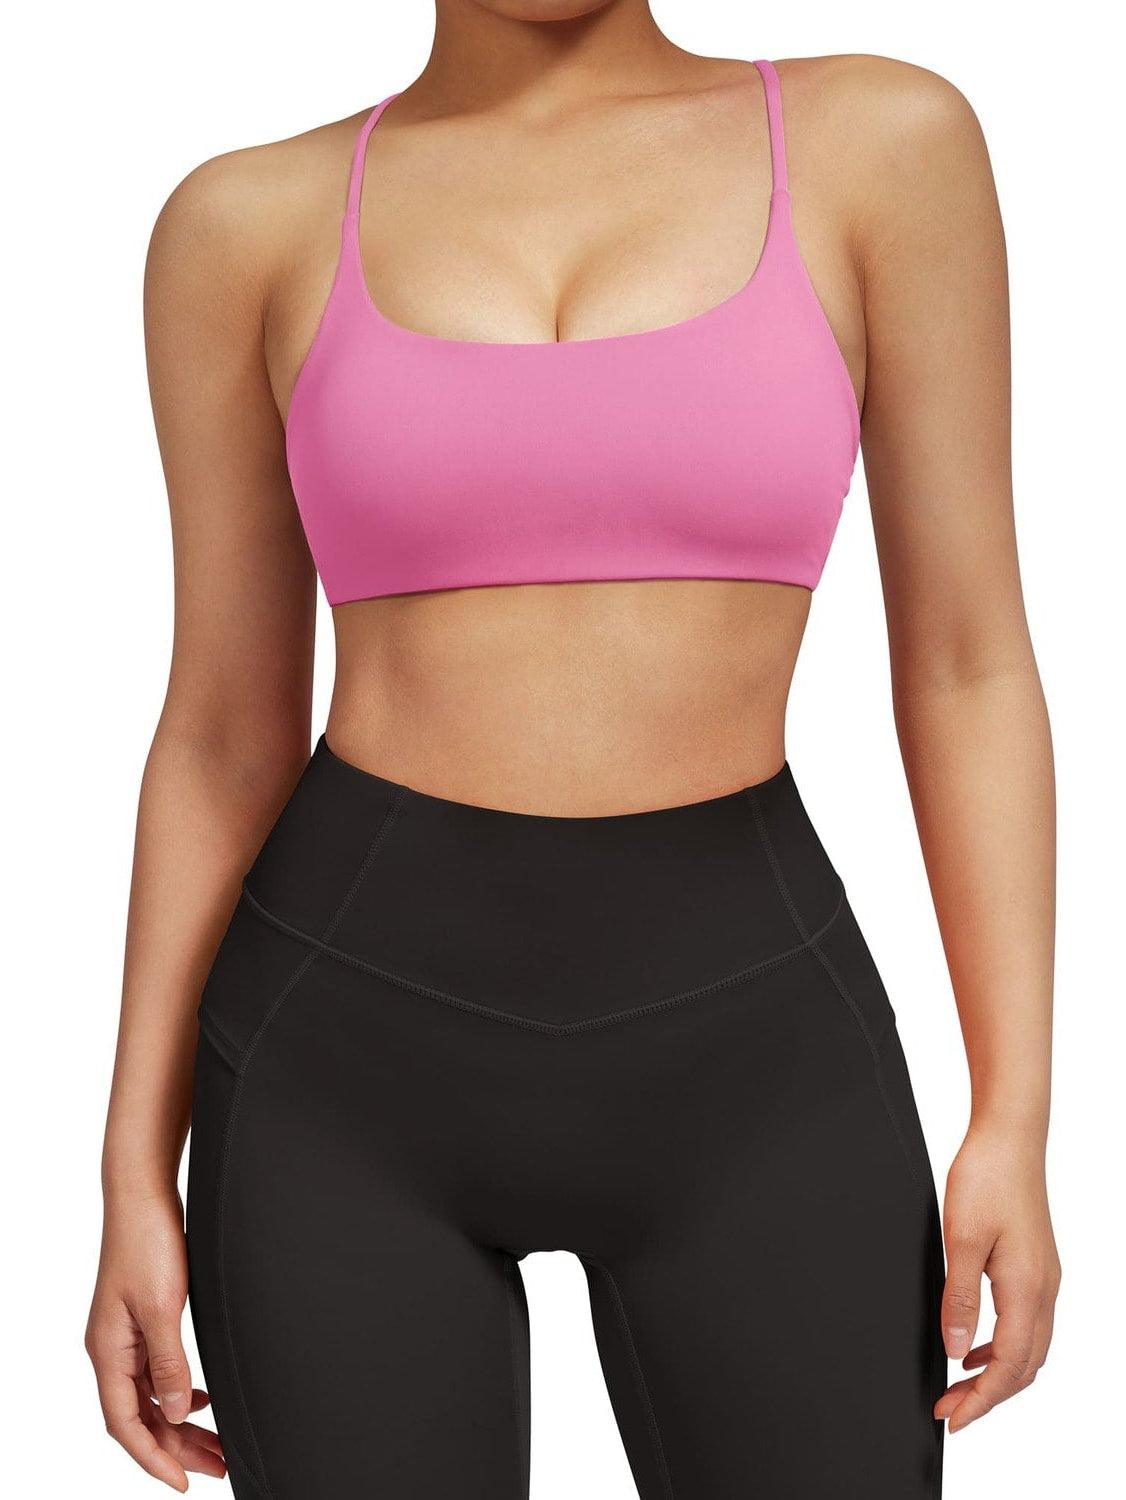 Flash Extended Sizes Seamless Sports Bras.